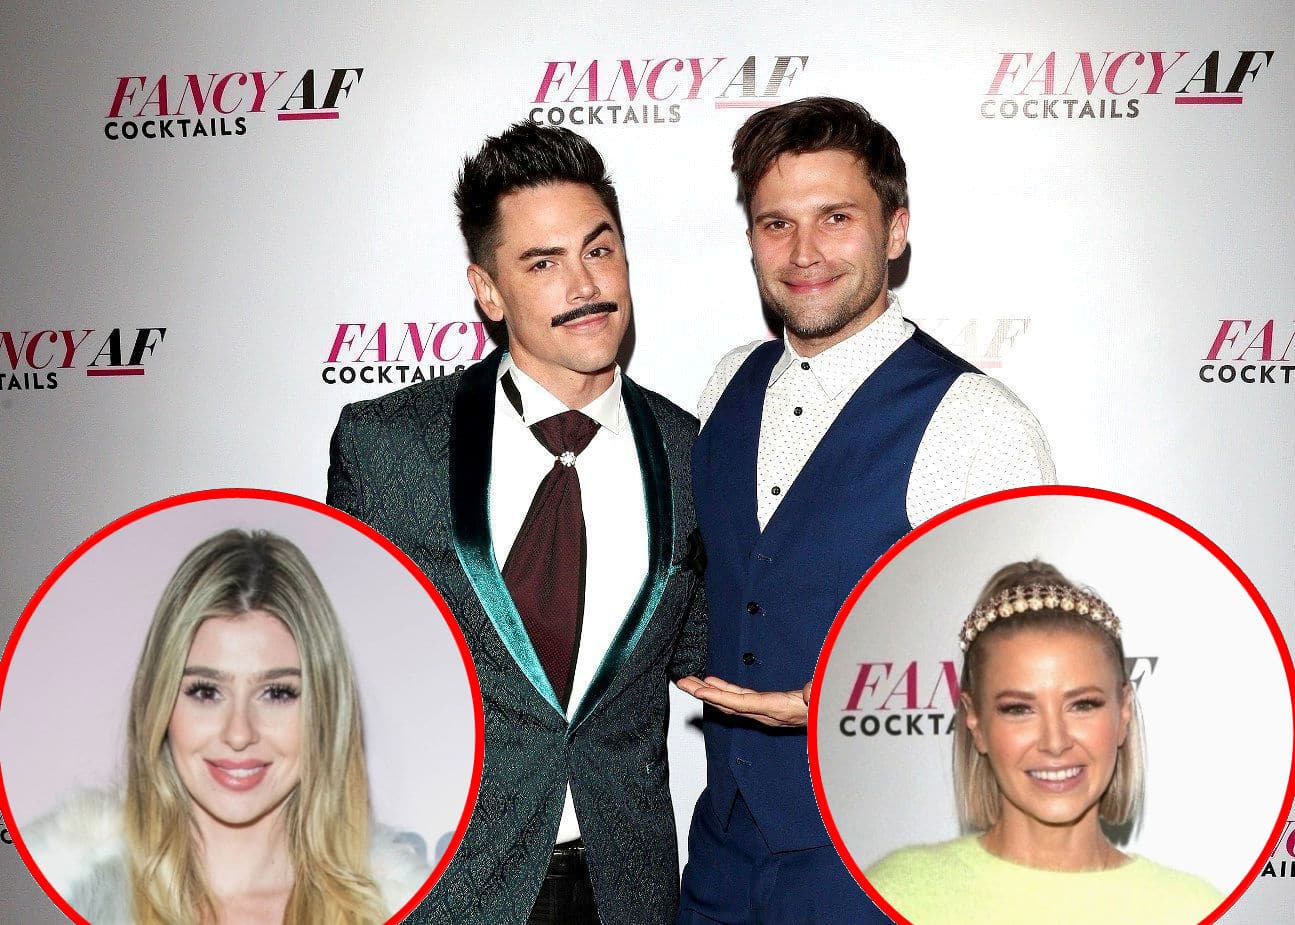 'Vanderpump Rules' stars Tom Sandoval and Tom Schwartz reportedly went on a double date with Raquel Leviss and Jo Wenberg before Ariana Madix's sandwich event.